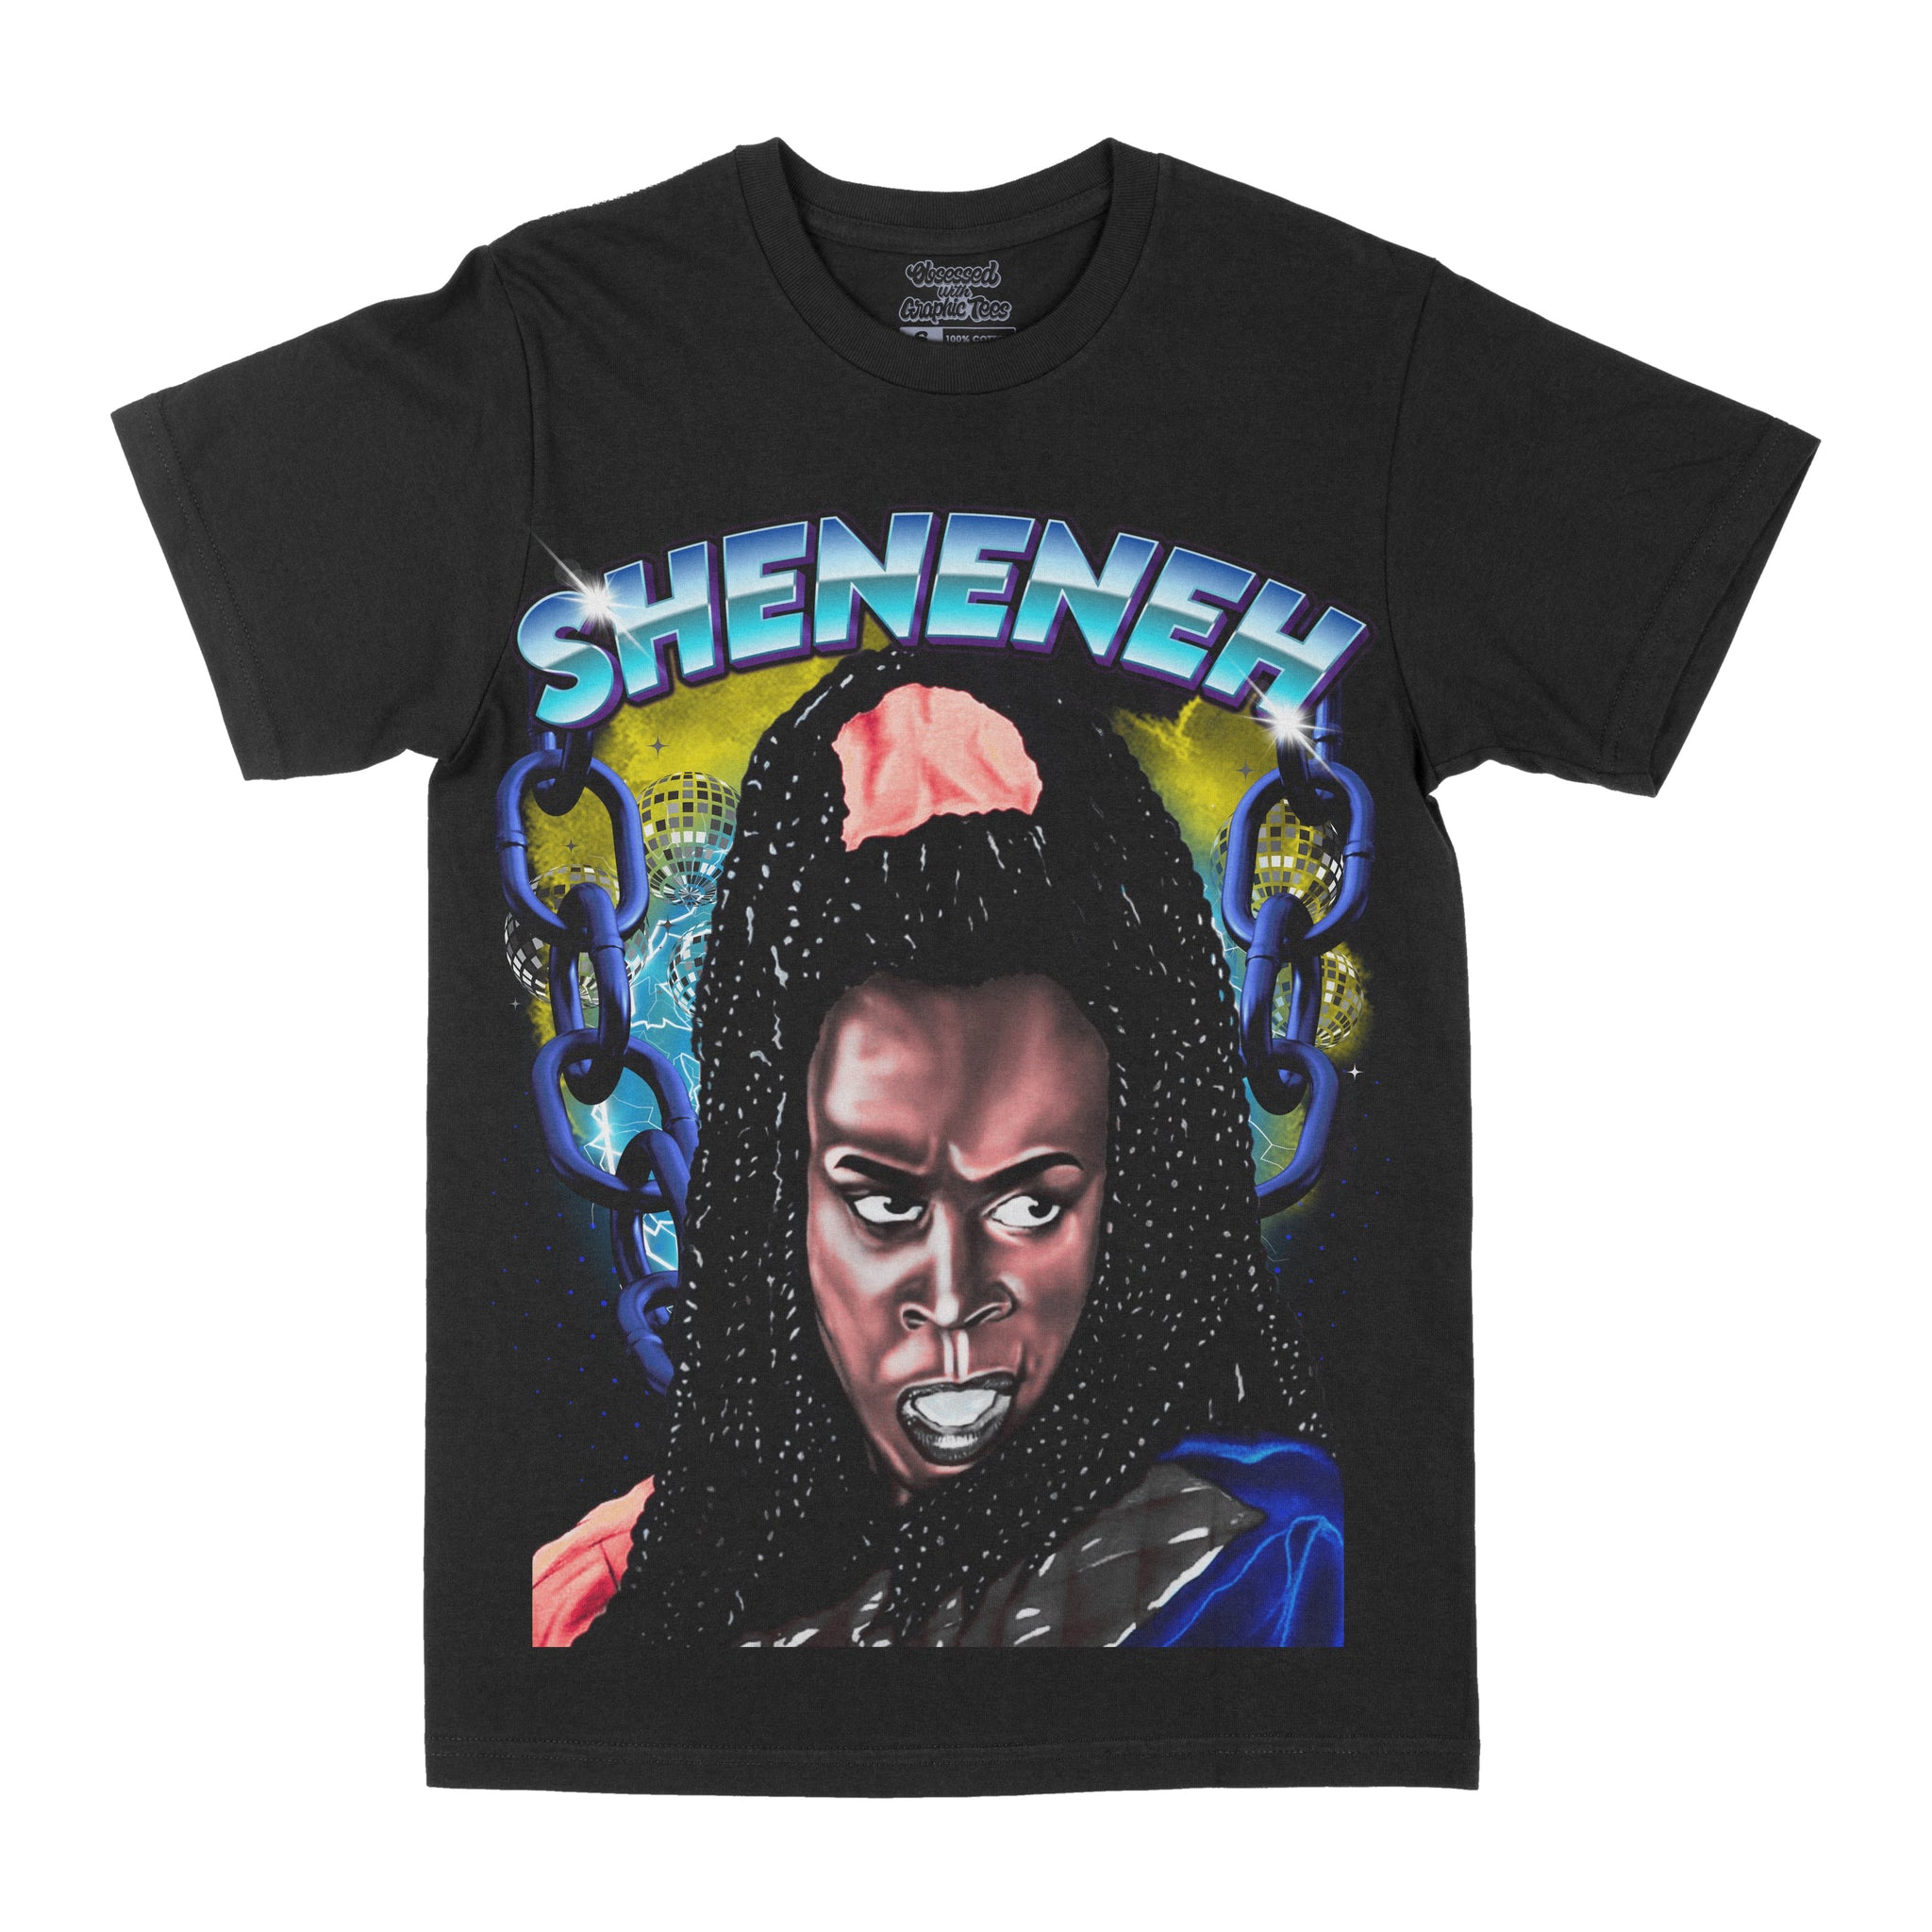 Sheneneh Graphic Tee